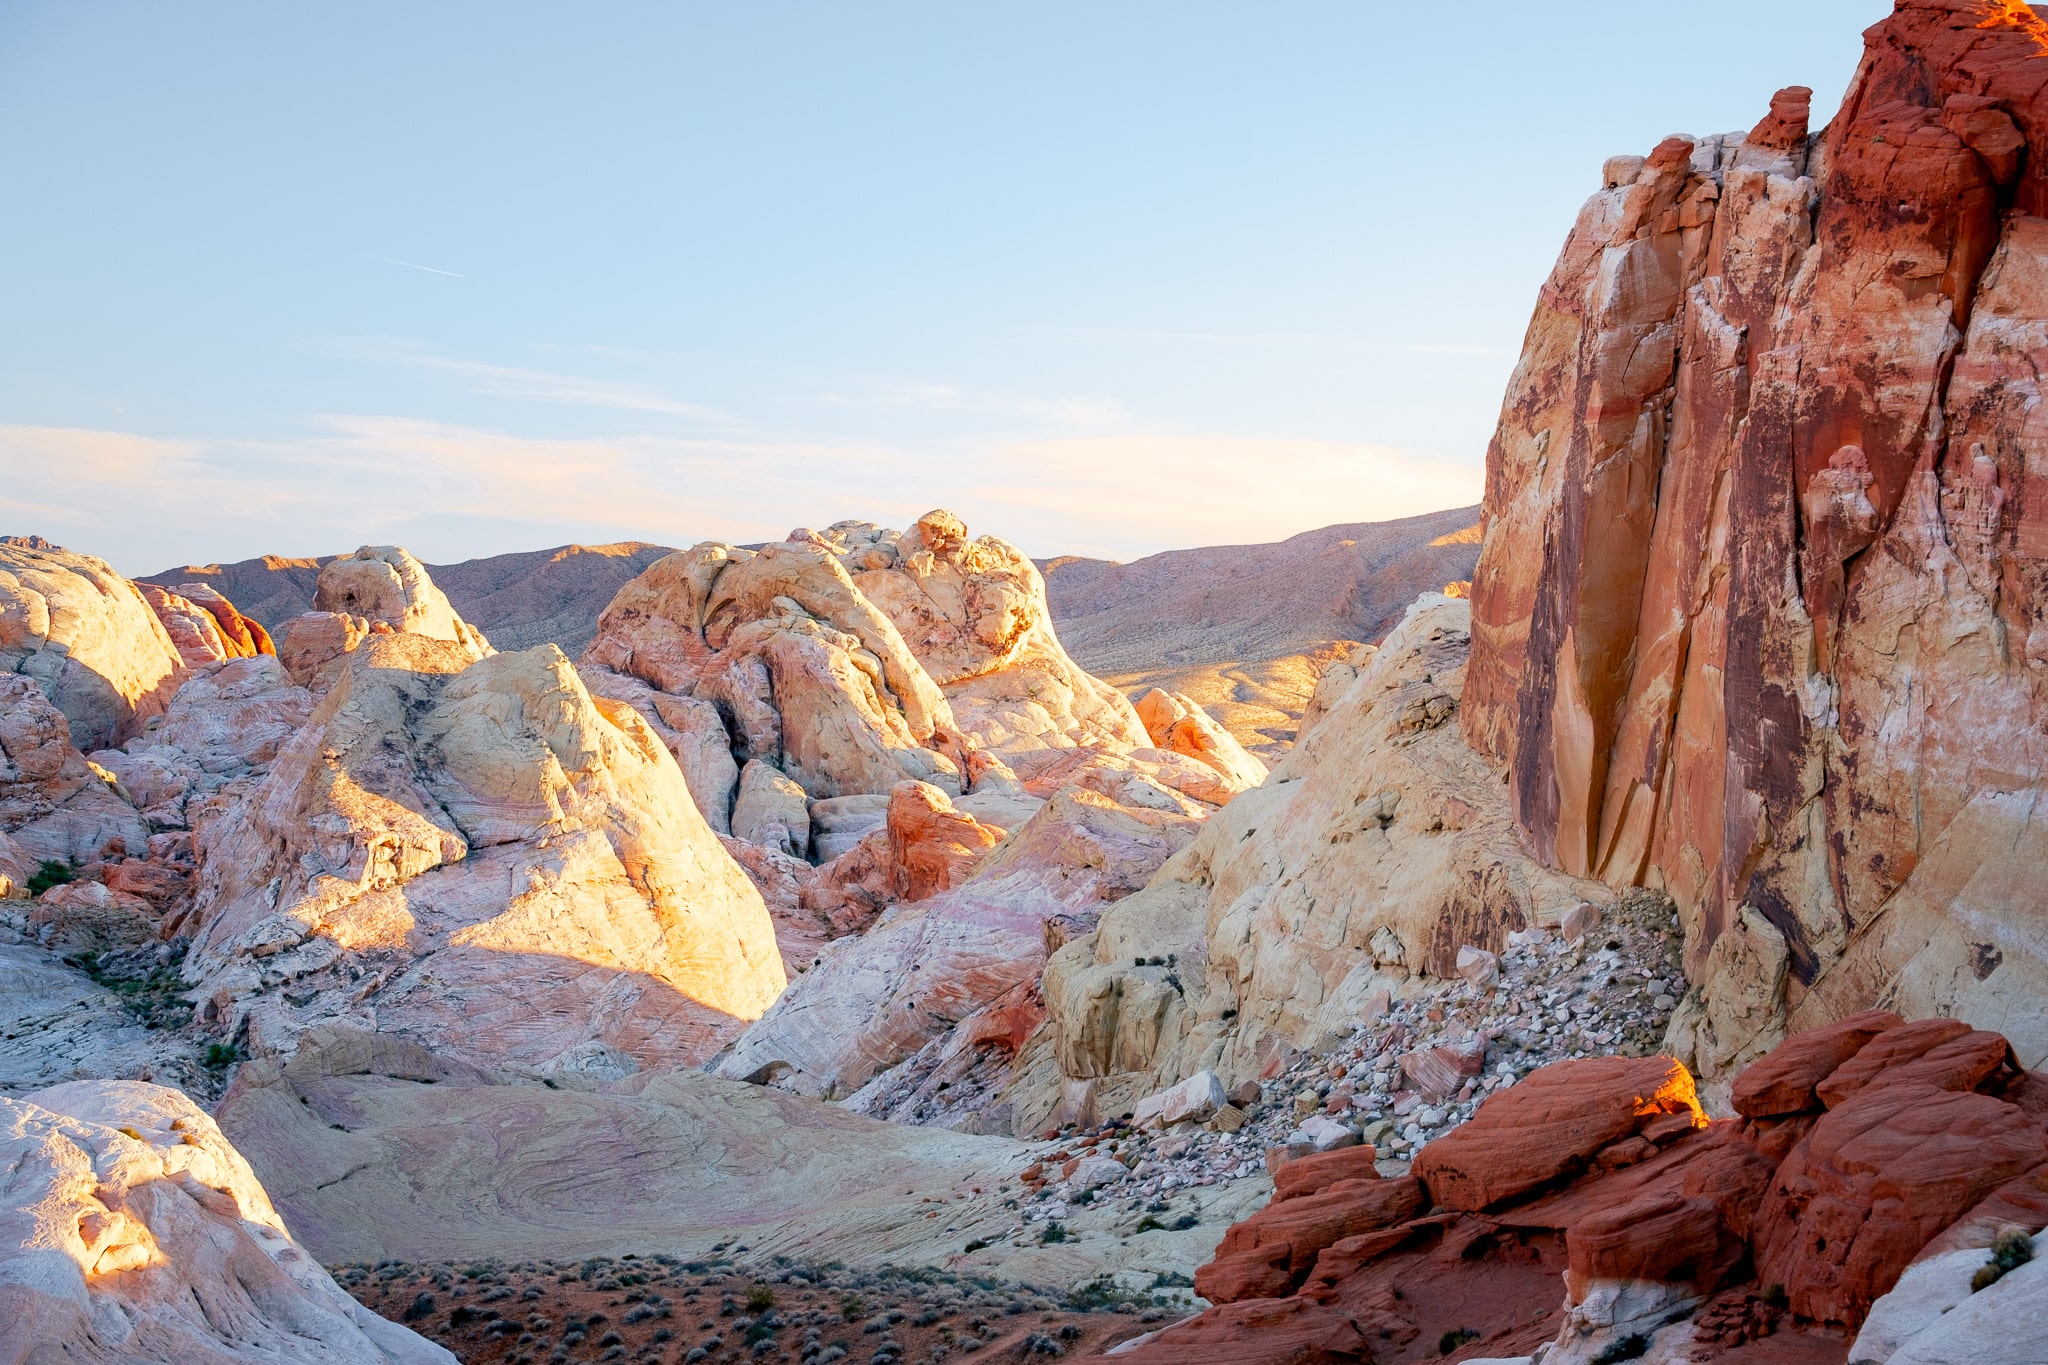 Landscape in Valley of Fire State Park in Nevada